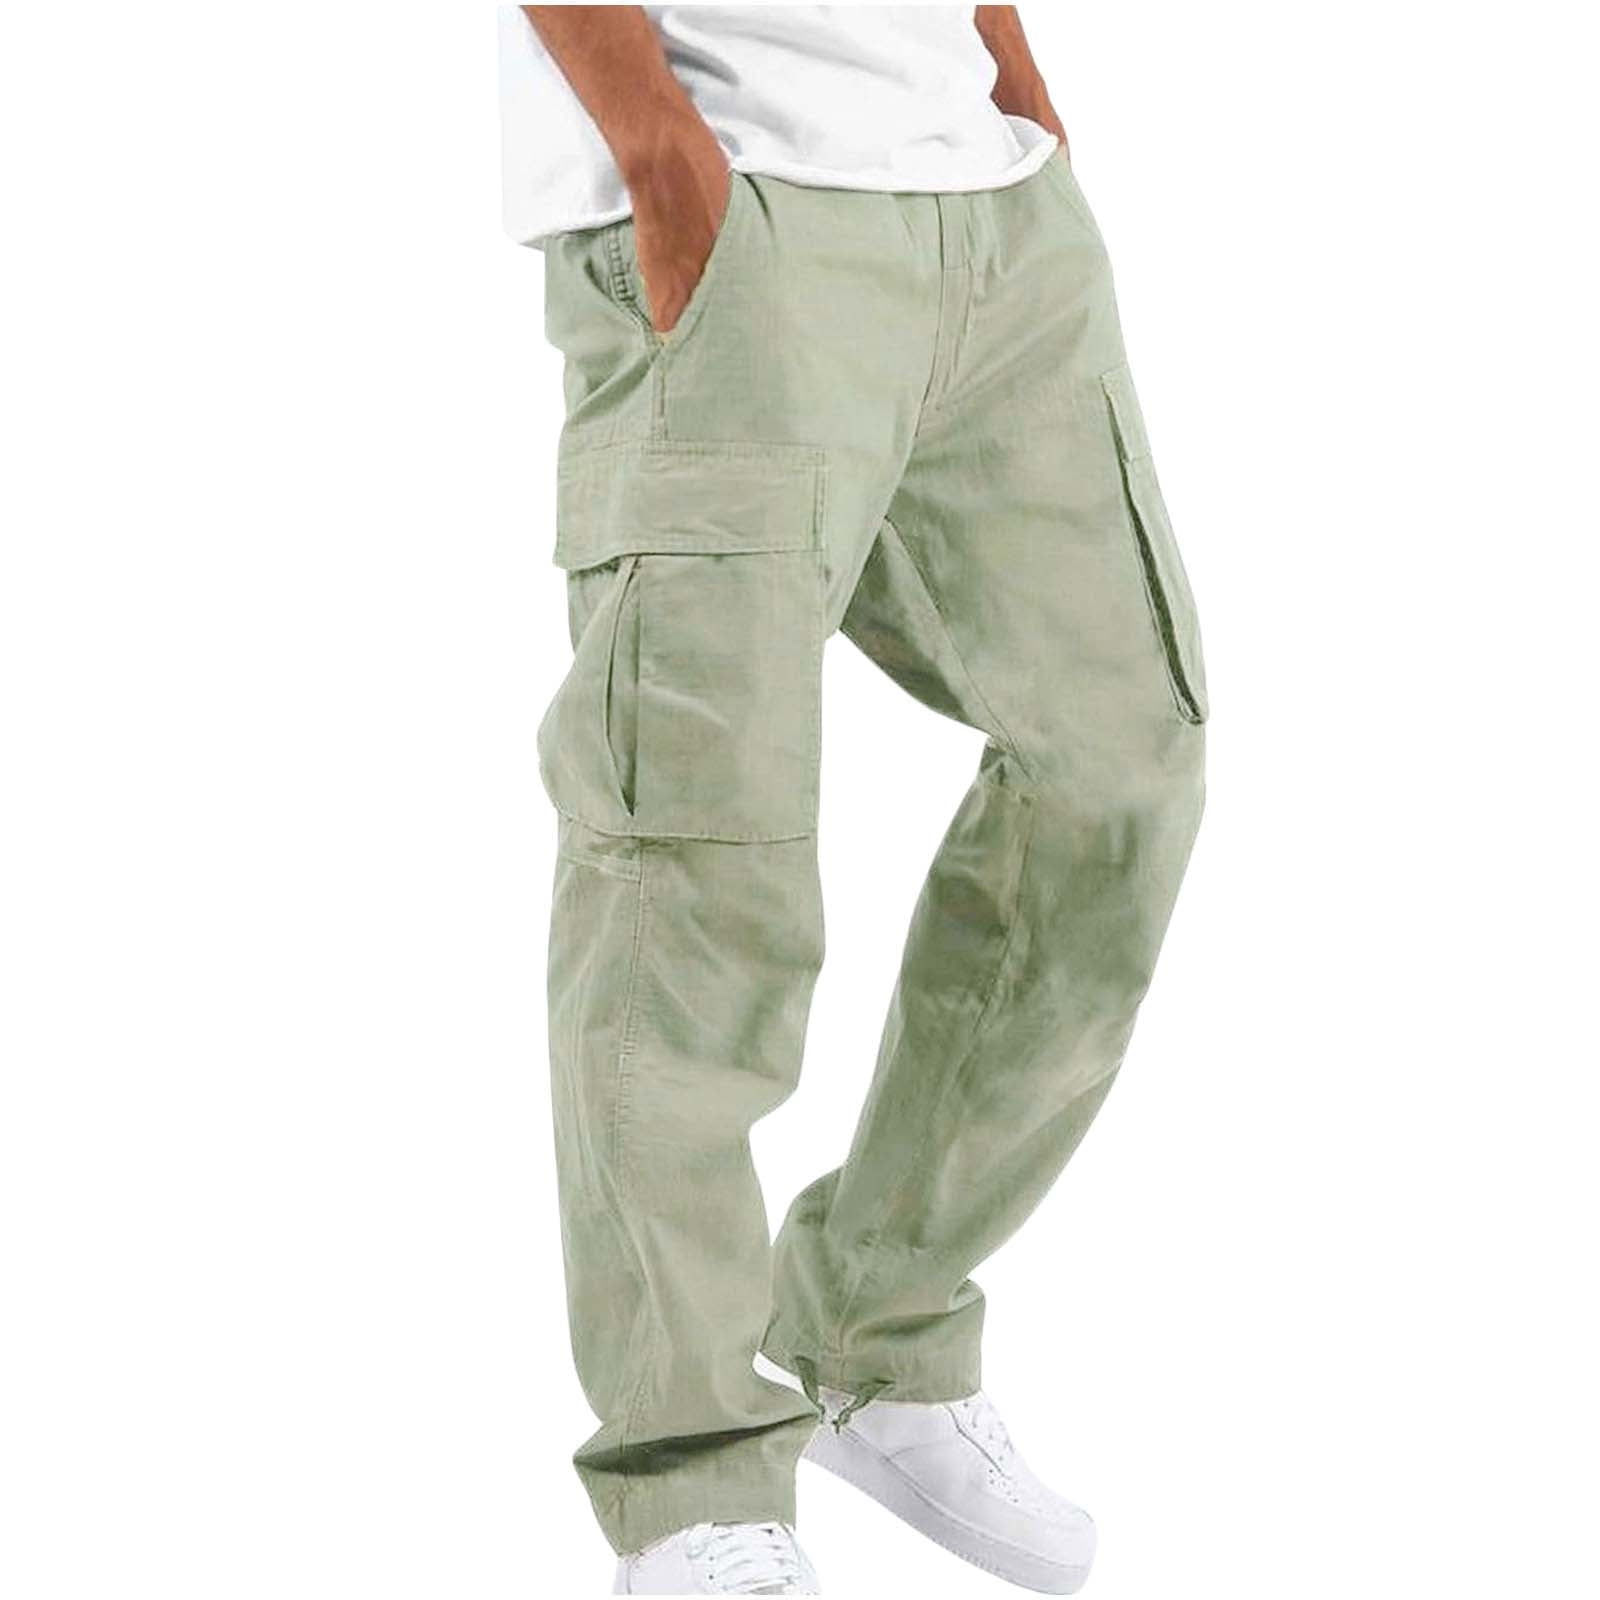 ZKCCNUK Cargo Pants for Men Solid Casual Multiple Pockets Outdoor Straight  Type Fitness Pants Cargo Pants Trousers Yellow XXL on Clearance -  Walmart.com